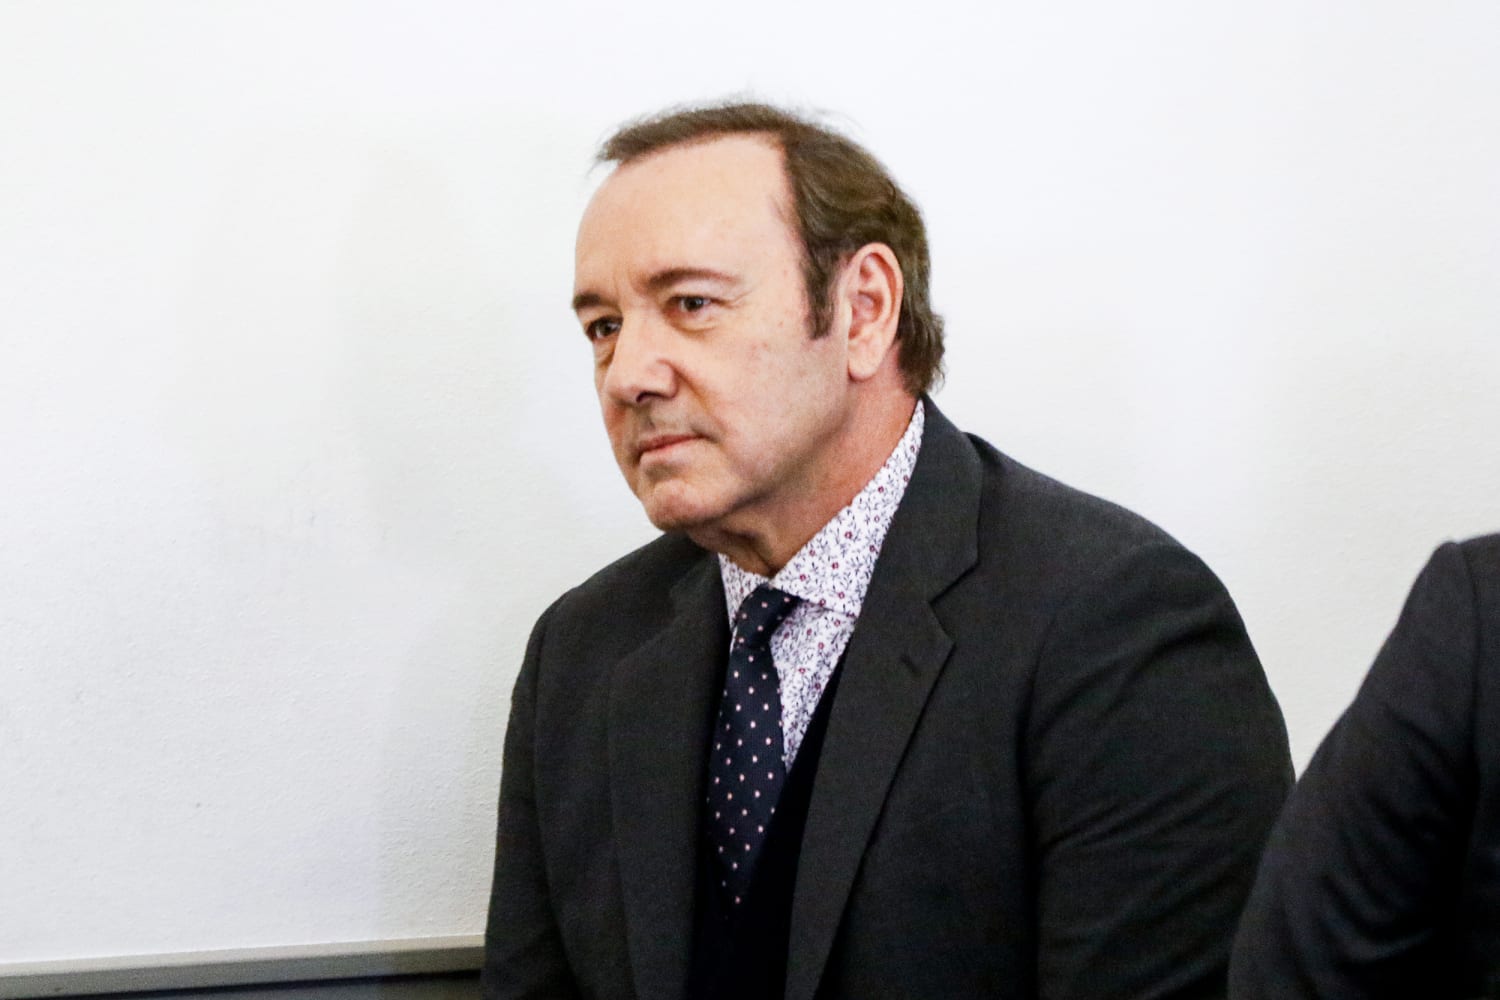 Kevin Spacey loses arbitration case against ‘House of Cards’ production company